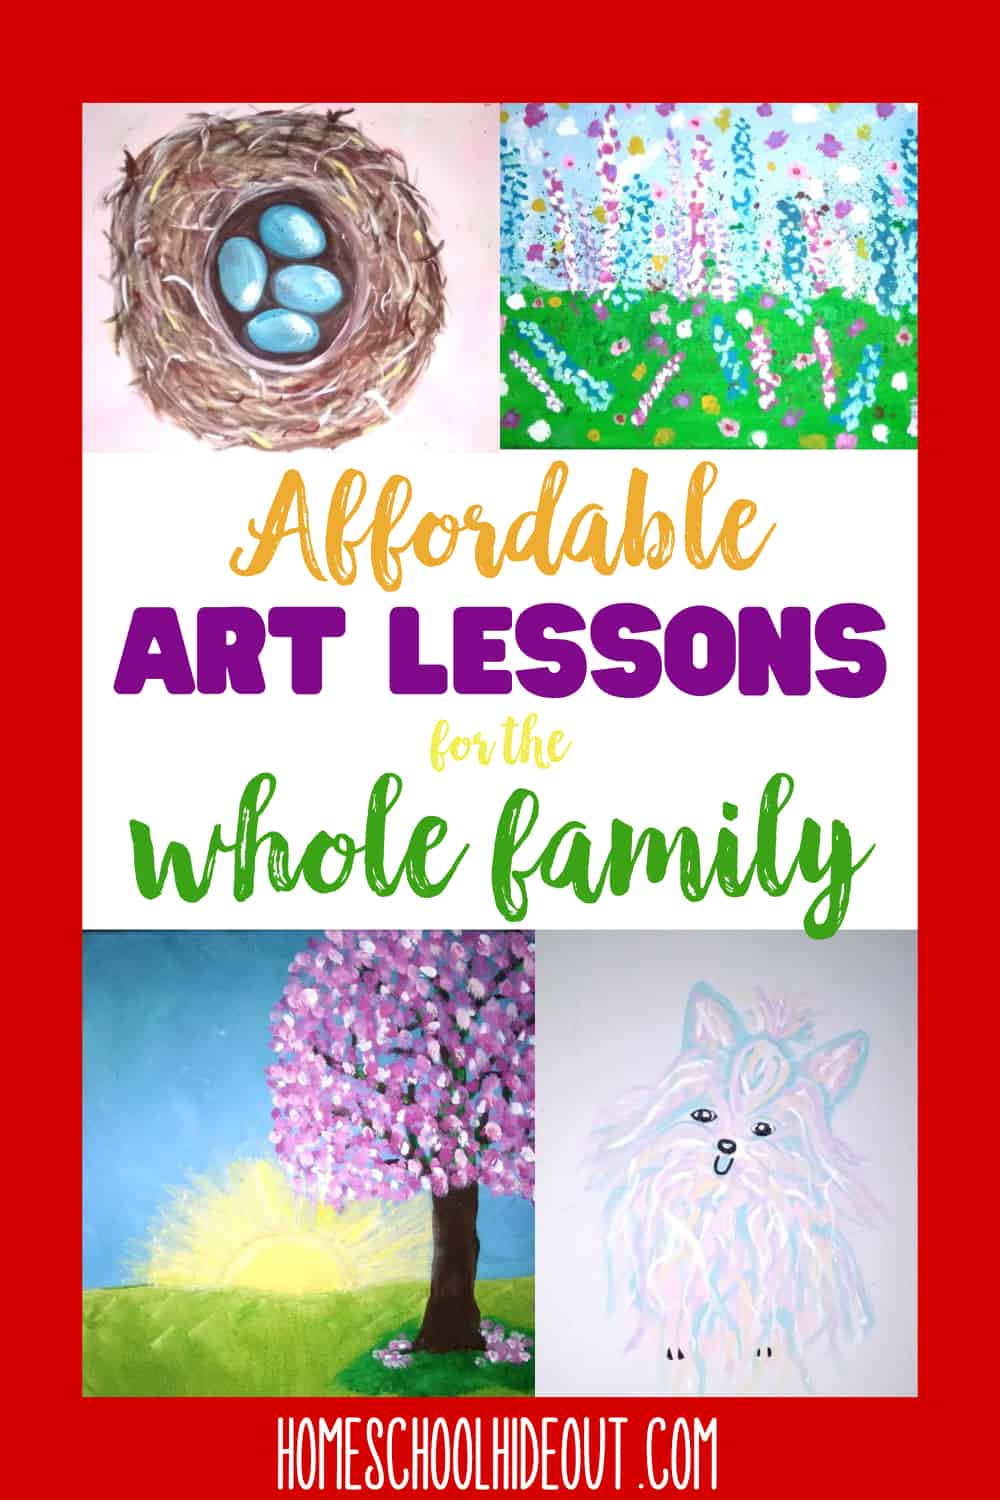 Looking for affordable homeschool art lessons? Check out Masterpiece Society, a collection of over 100+ videos to help you bring out your inner artist! #homeschooling @artlessons #masterpiecesociety.jpg